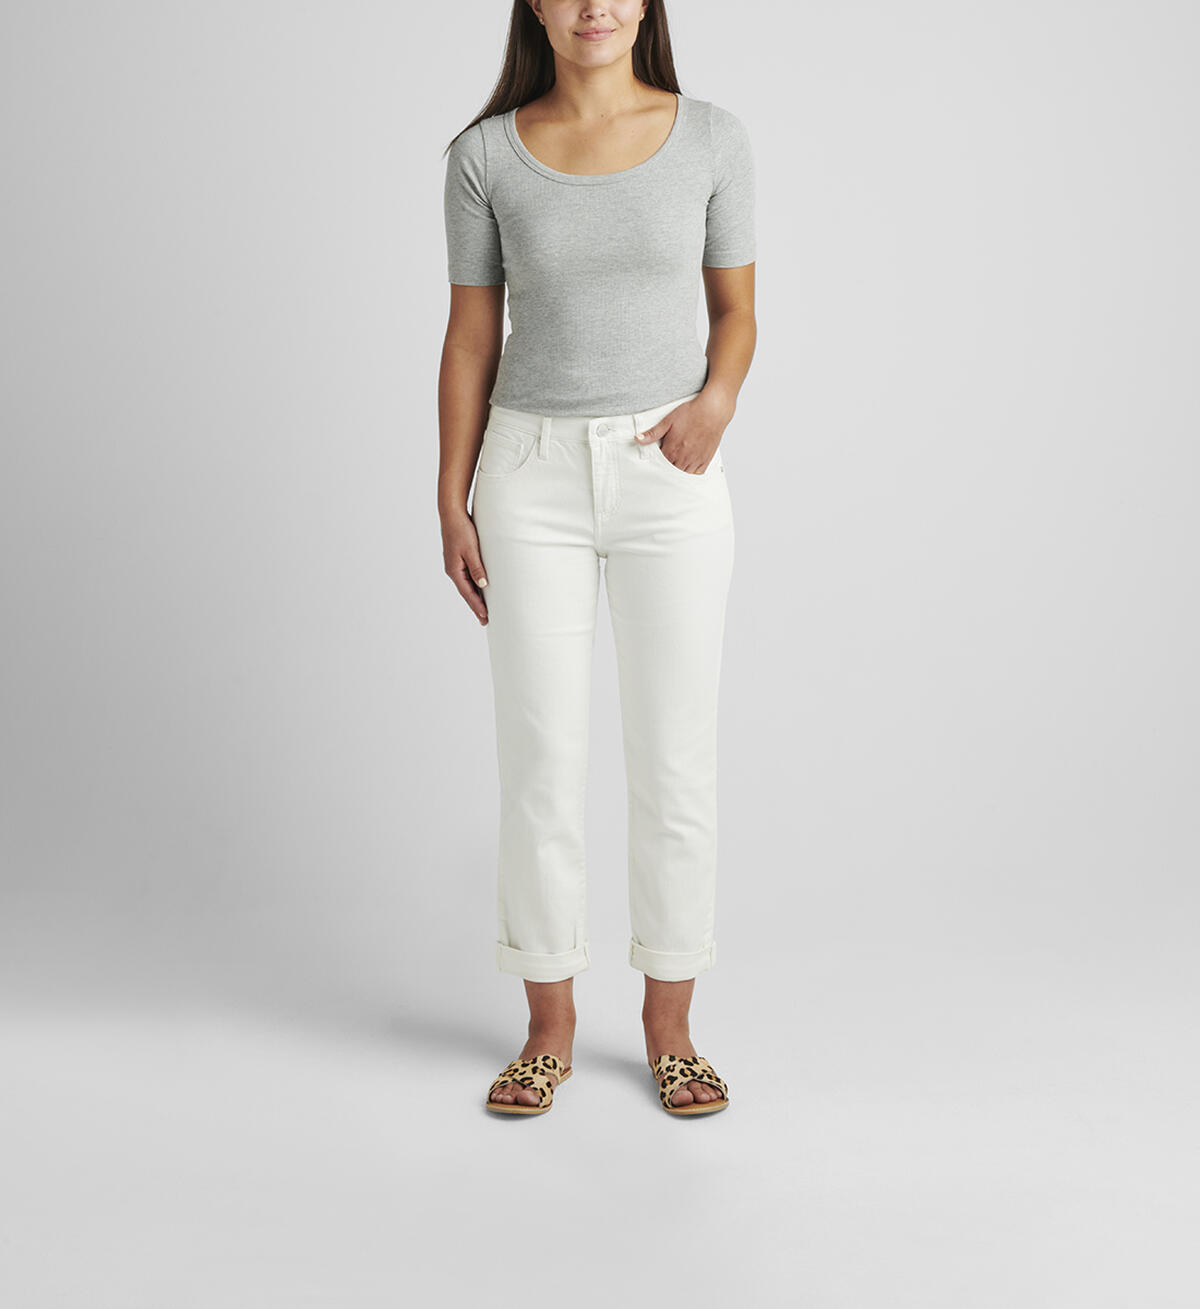 Carter Mid Rise Girlfriend Jeans, White, hi-res image number 0